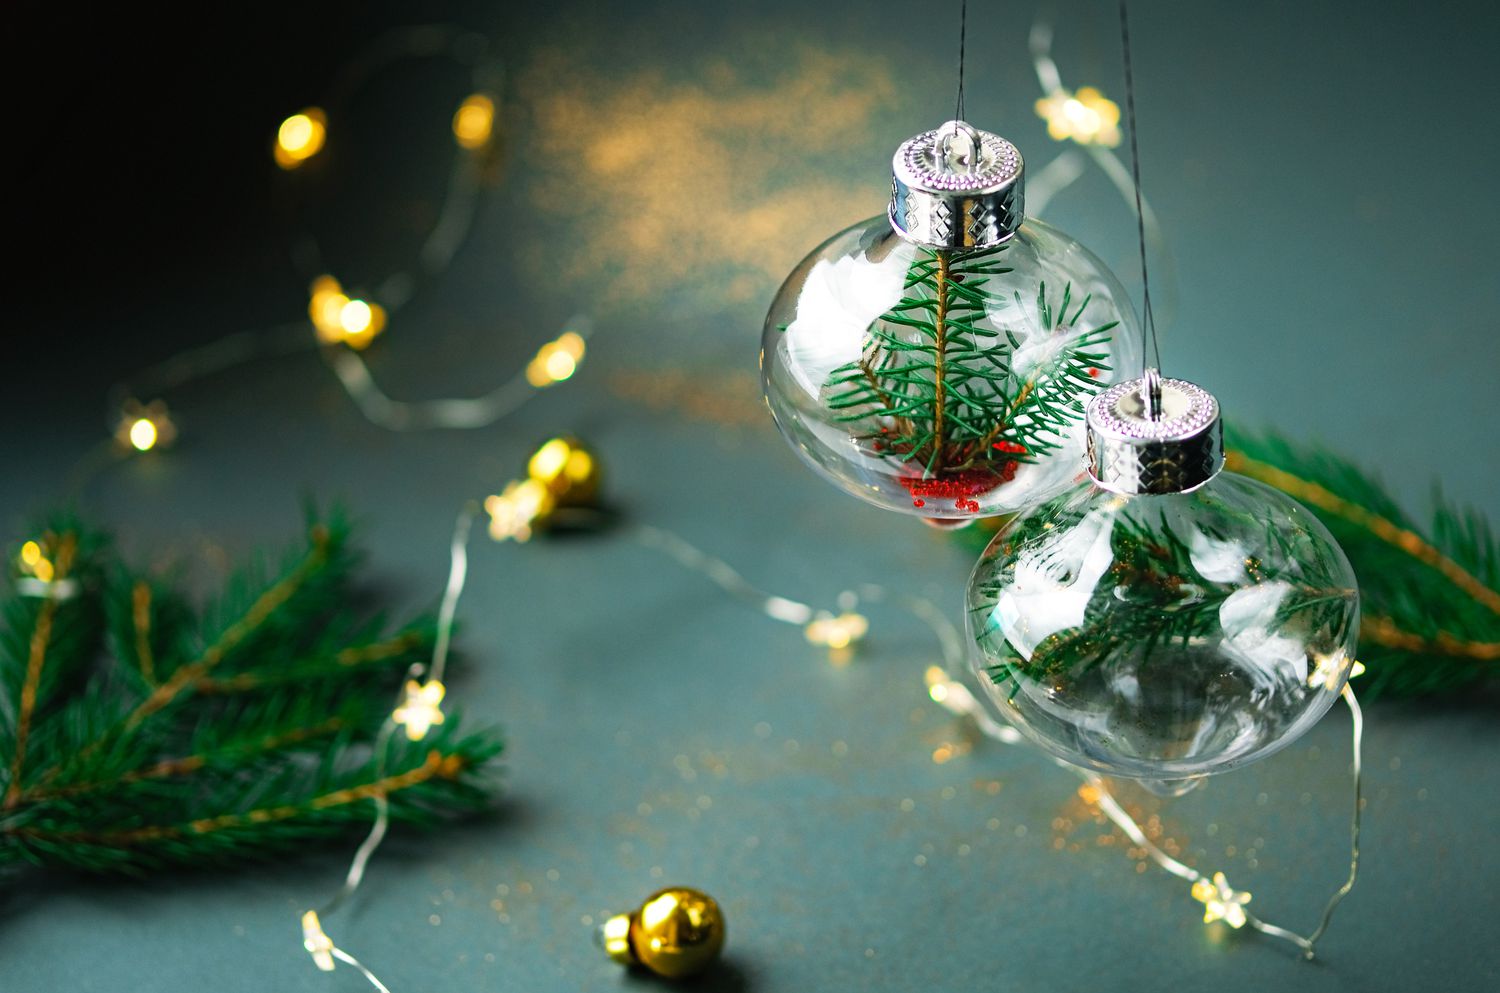 How To Make Glass Ornaments